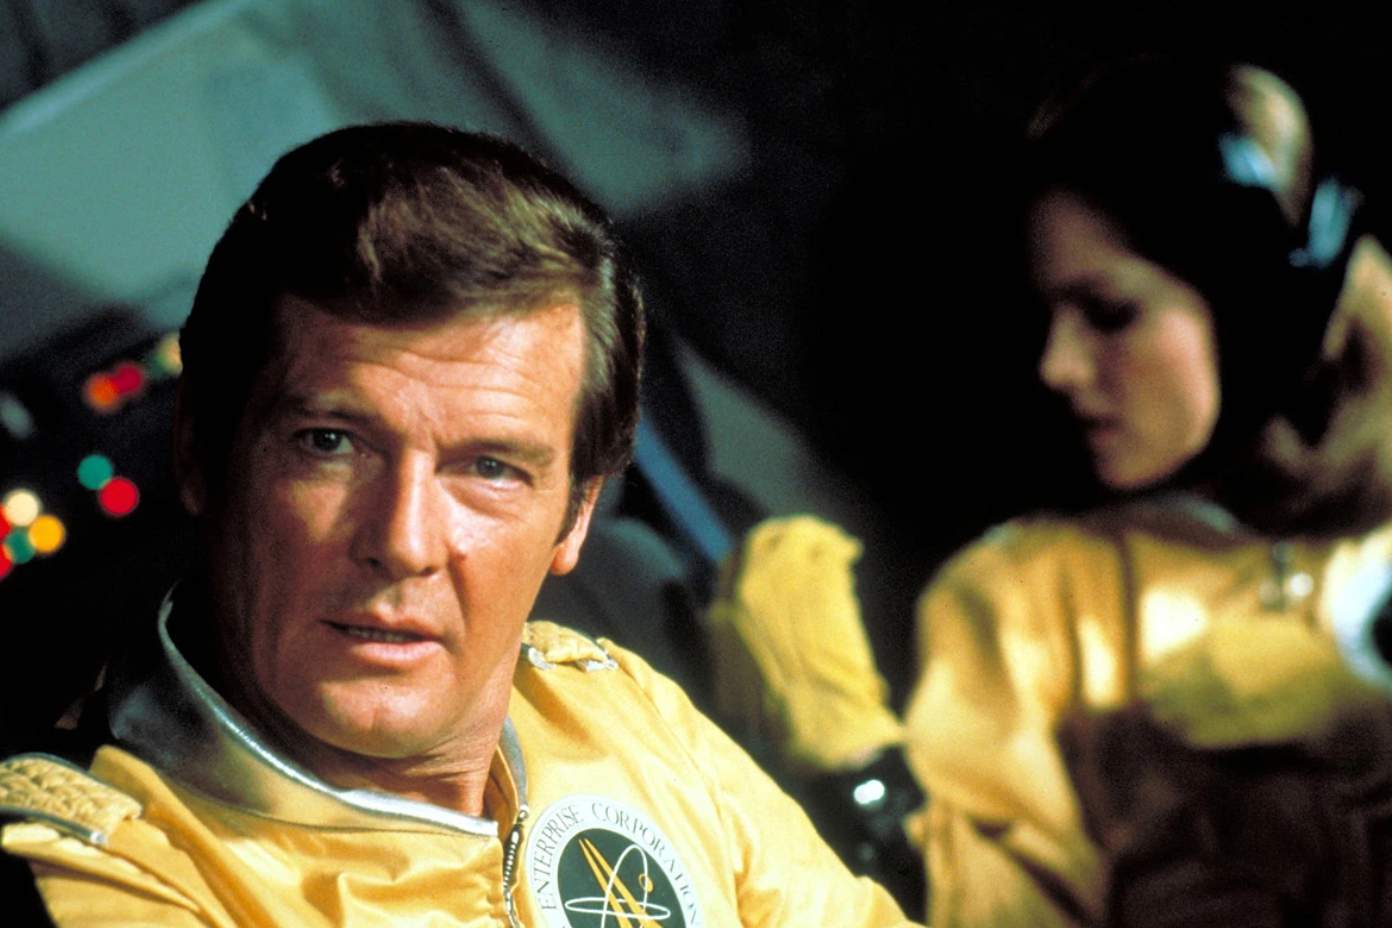 007 (Roger Moore) blasts into outer space in Moonraker